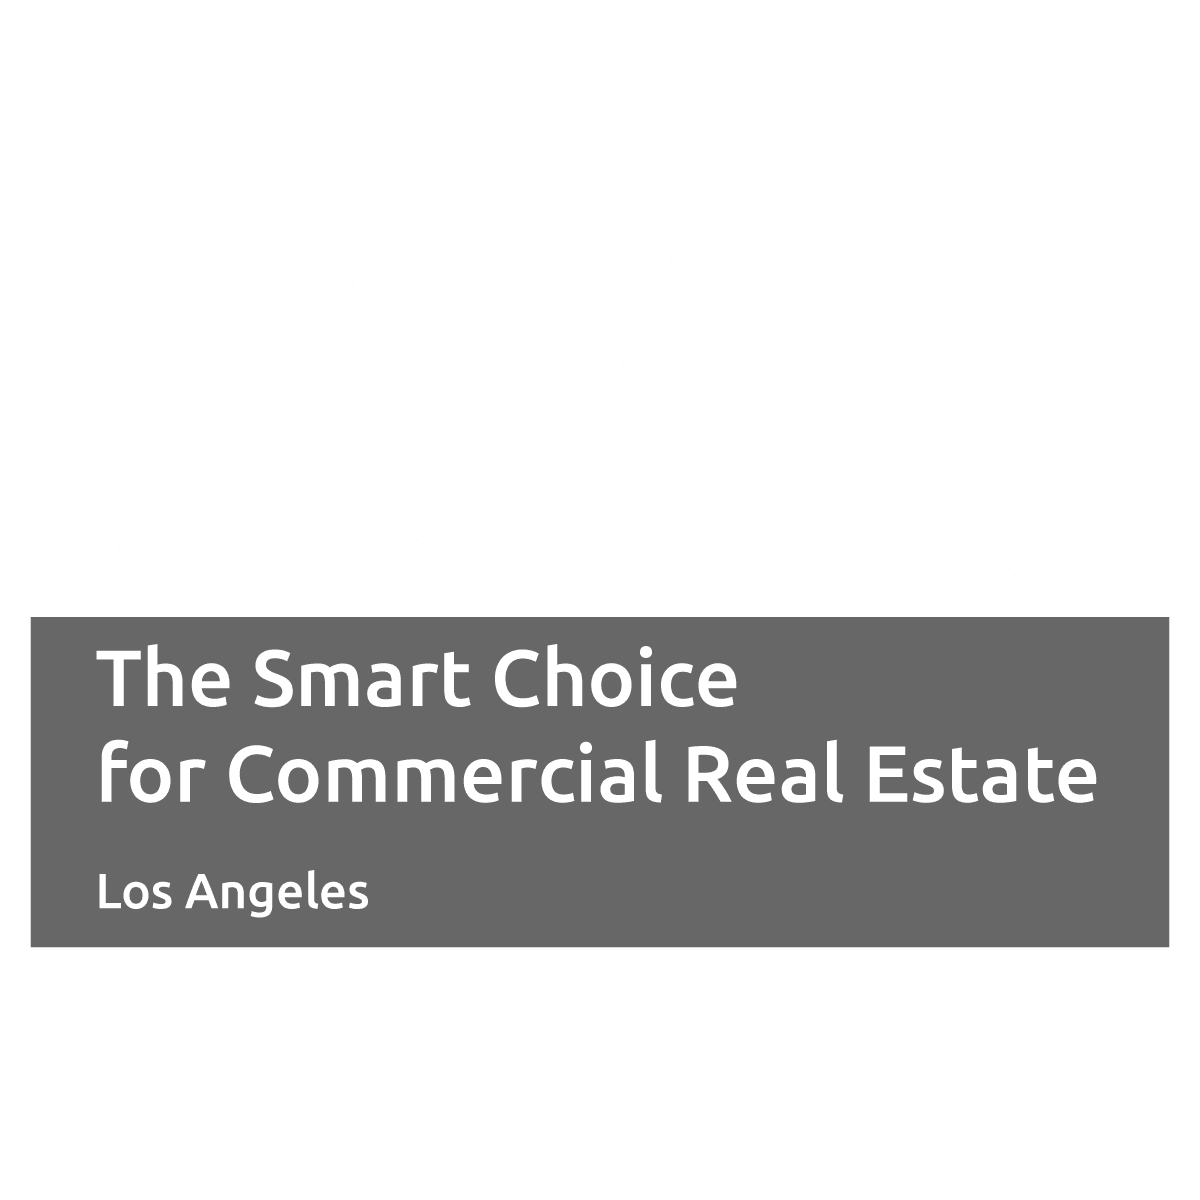 RAAM | Realty Advisors and Asset Managers, Inc. - Los Angeles